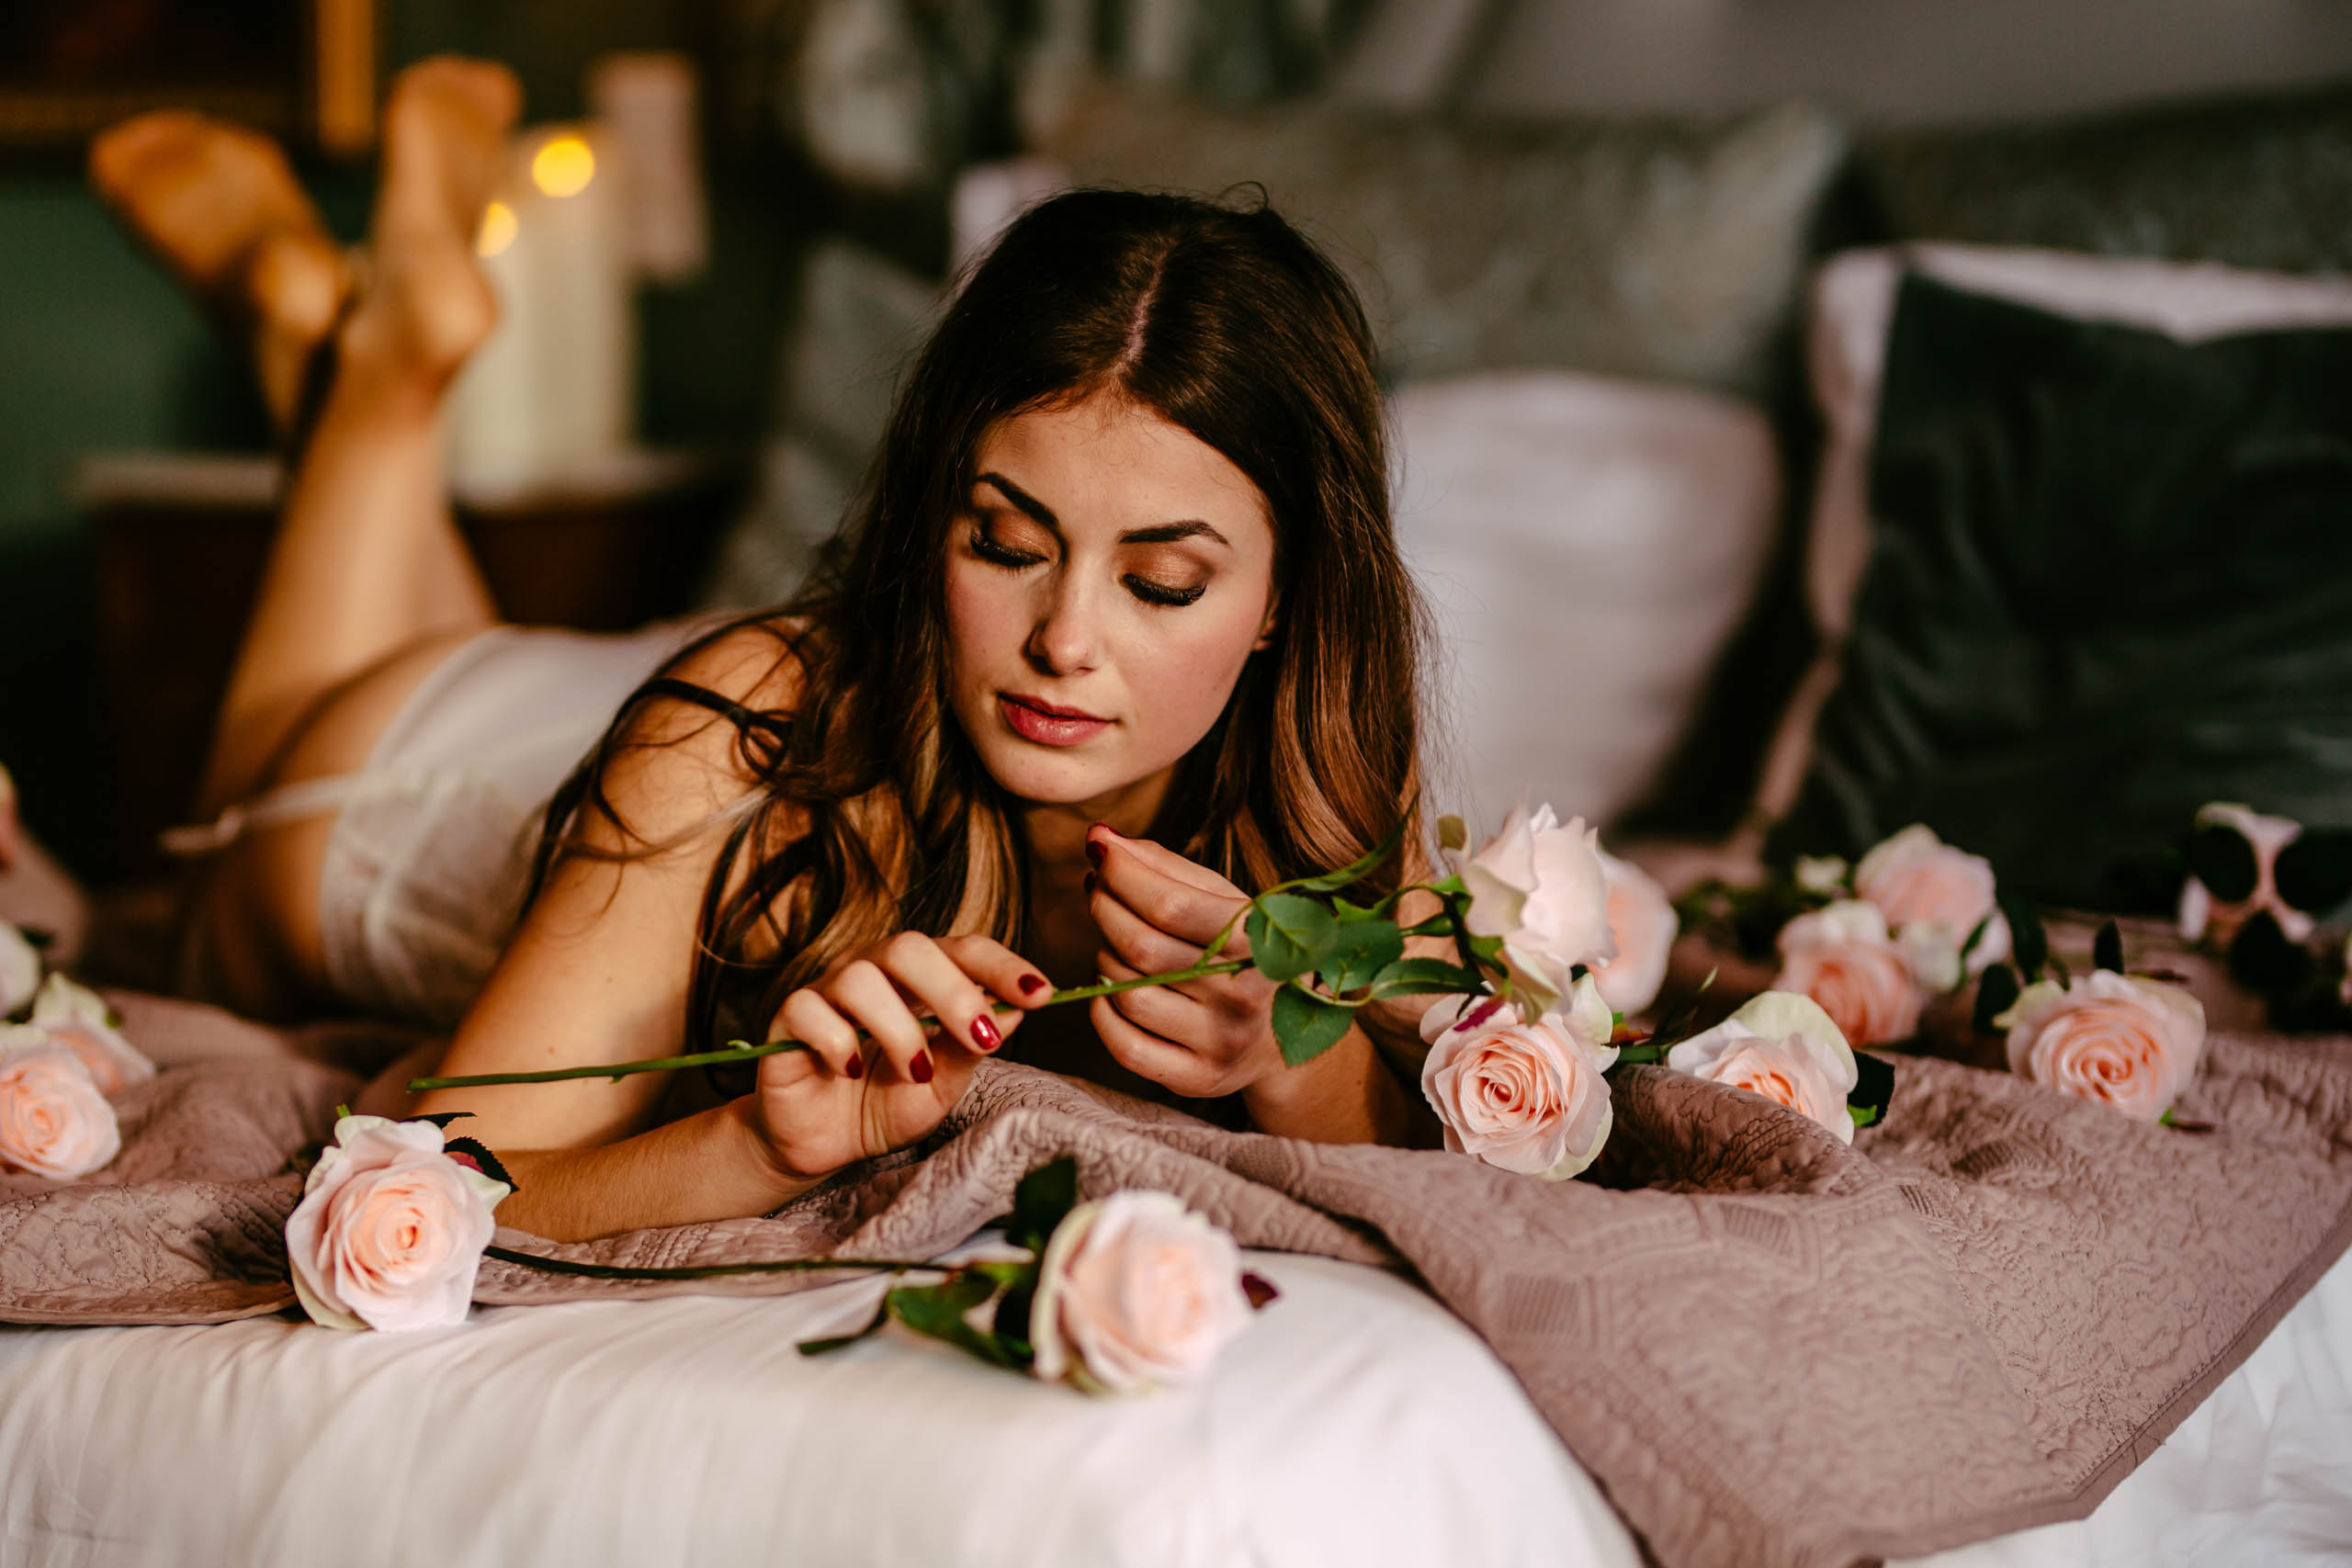 A sensual boudoir shoot of a woman in Delft, surrounded by beautiful roses on a bed.